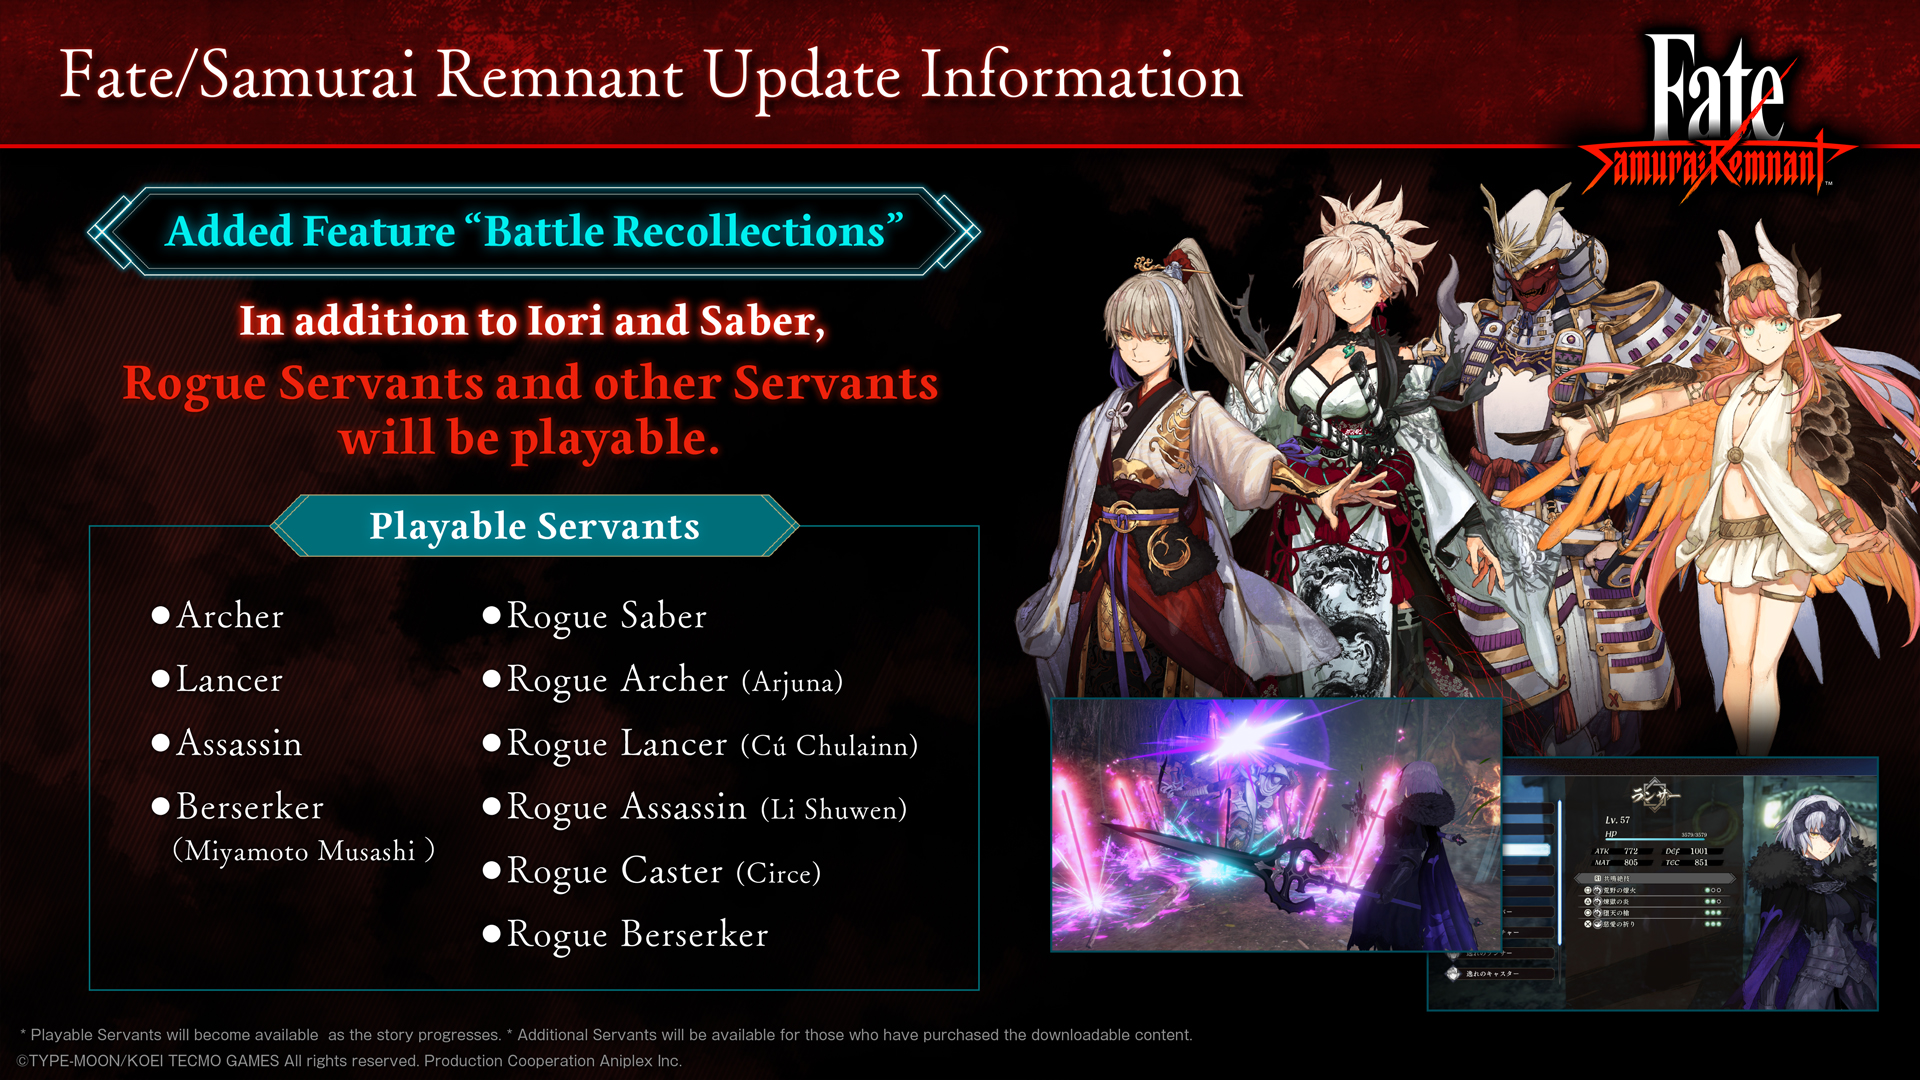 Fate/Samurai Remnant version 1.03 update now available, adds new difficulty levels, playable Servants